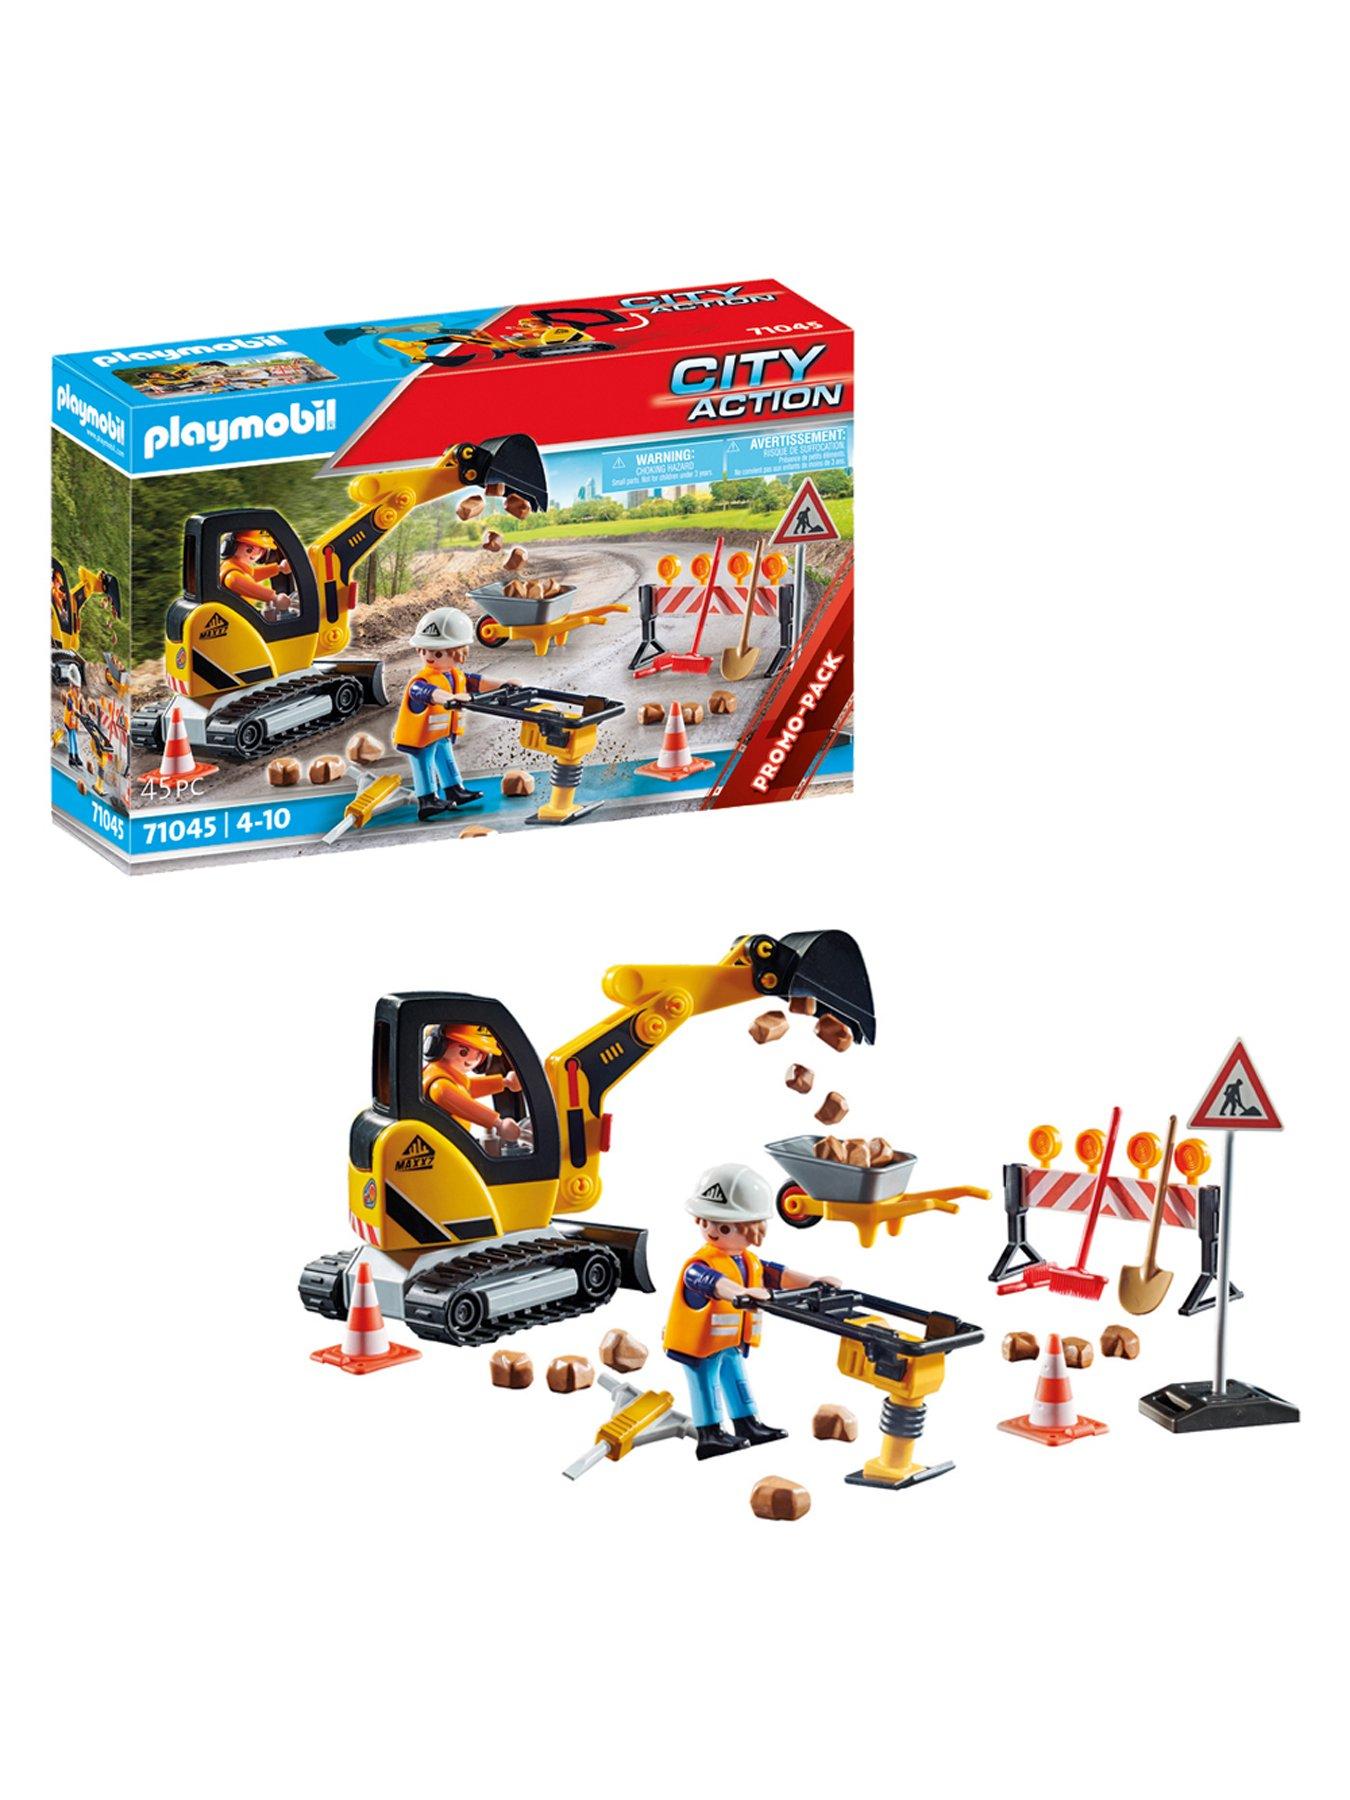 Playmobil 71045 Road Works Construction Zone Playset